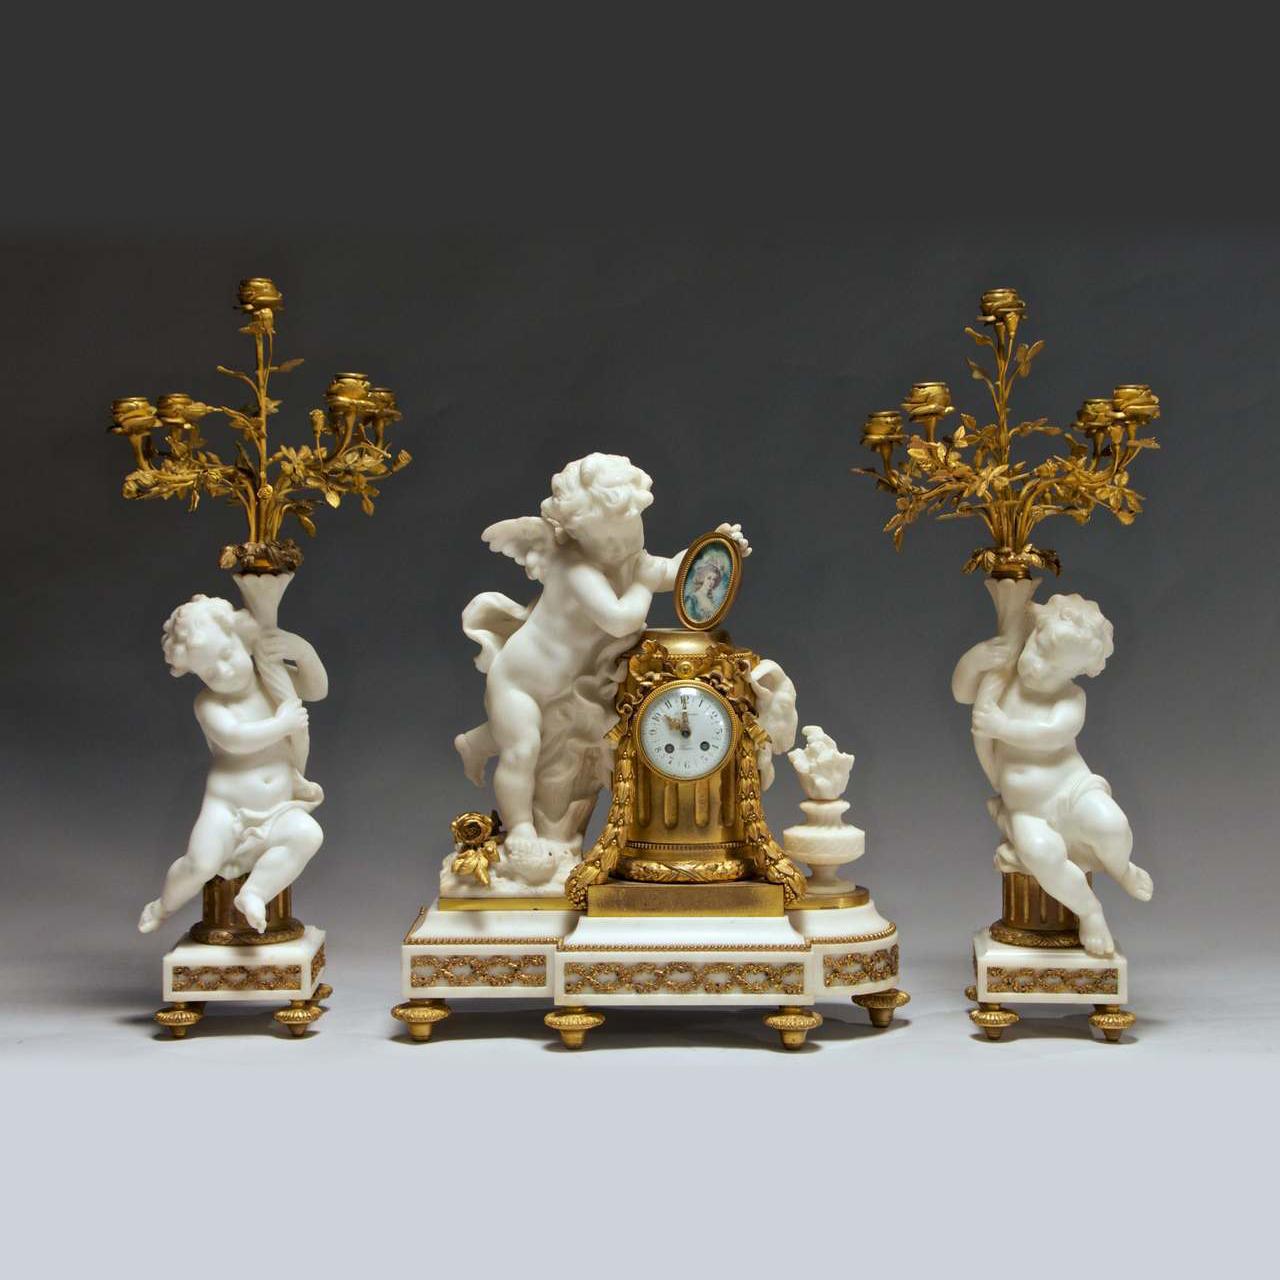 Fine and important French ormolu and marble cherubs clock garniture
Comprising a clock and a pair of five-light candelabra.

 
 
Origin: French
 
Date: 19th century
 
Dimension: The clock 20 1/2 in. high, 18 1/2 in. wide, 8 1/2 in. deep,